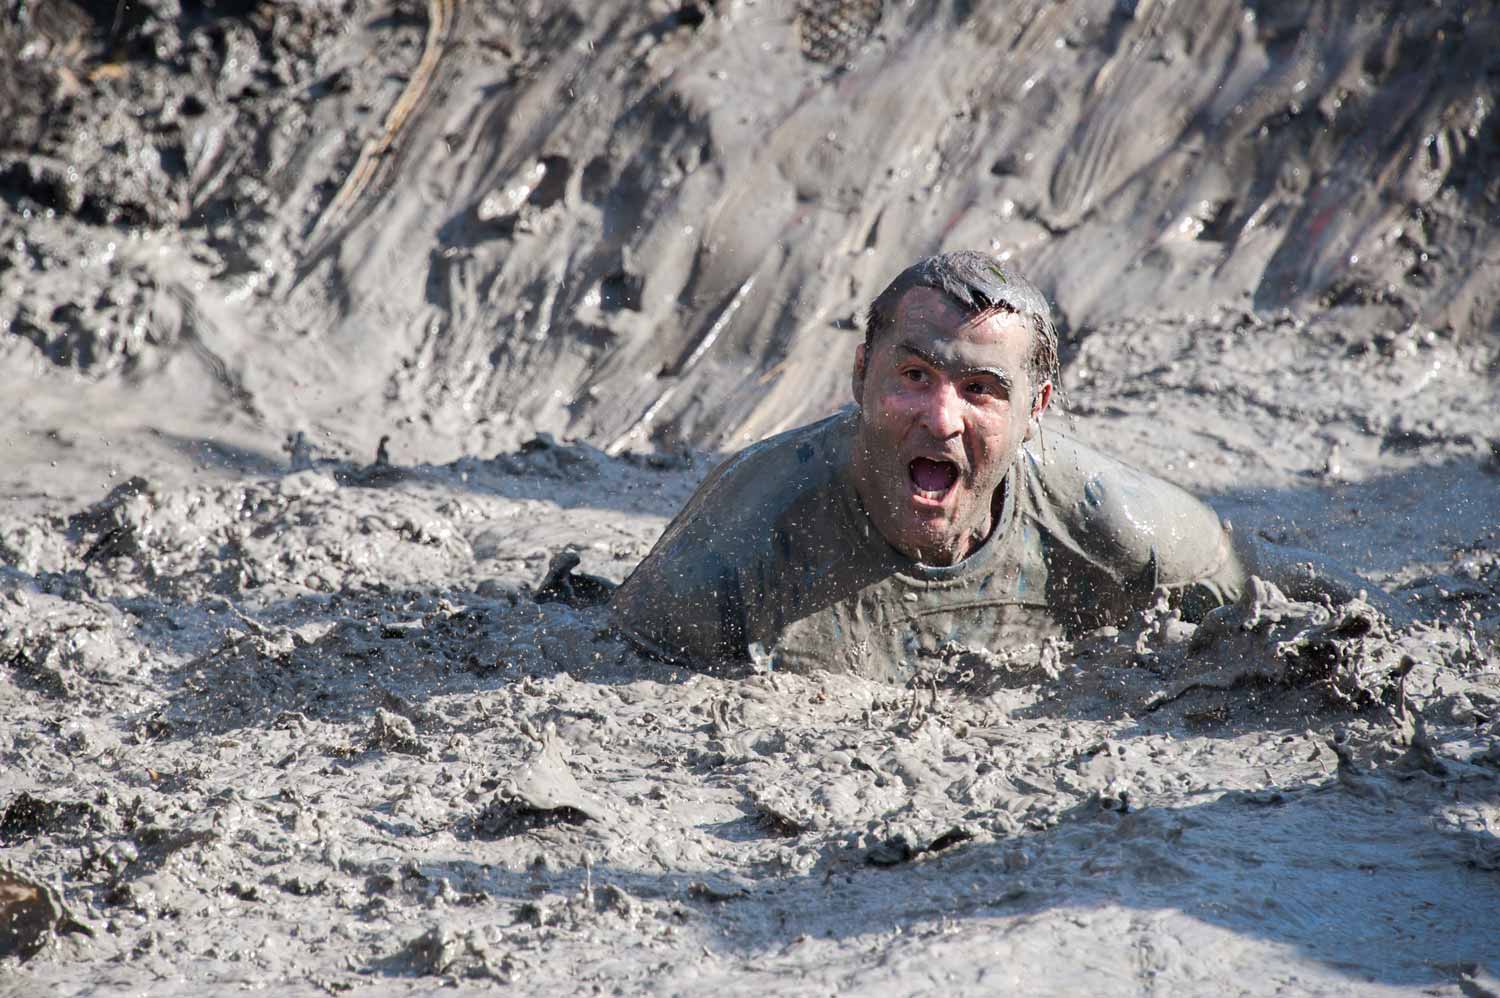 Into the mud slide.